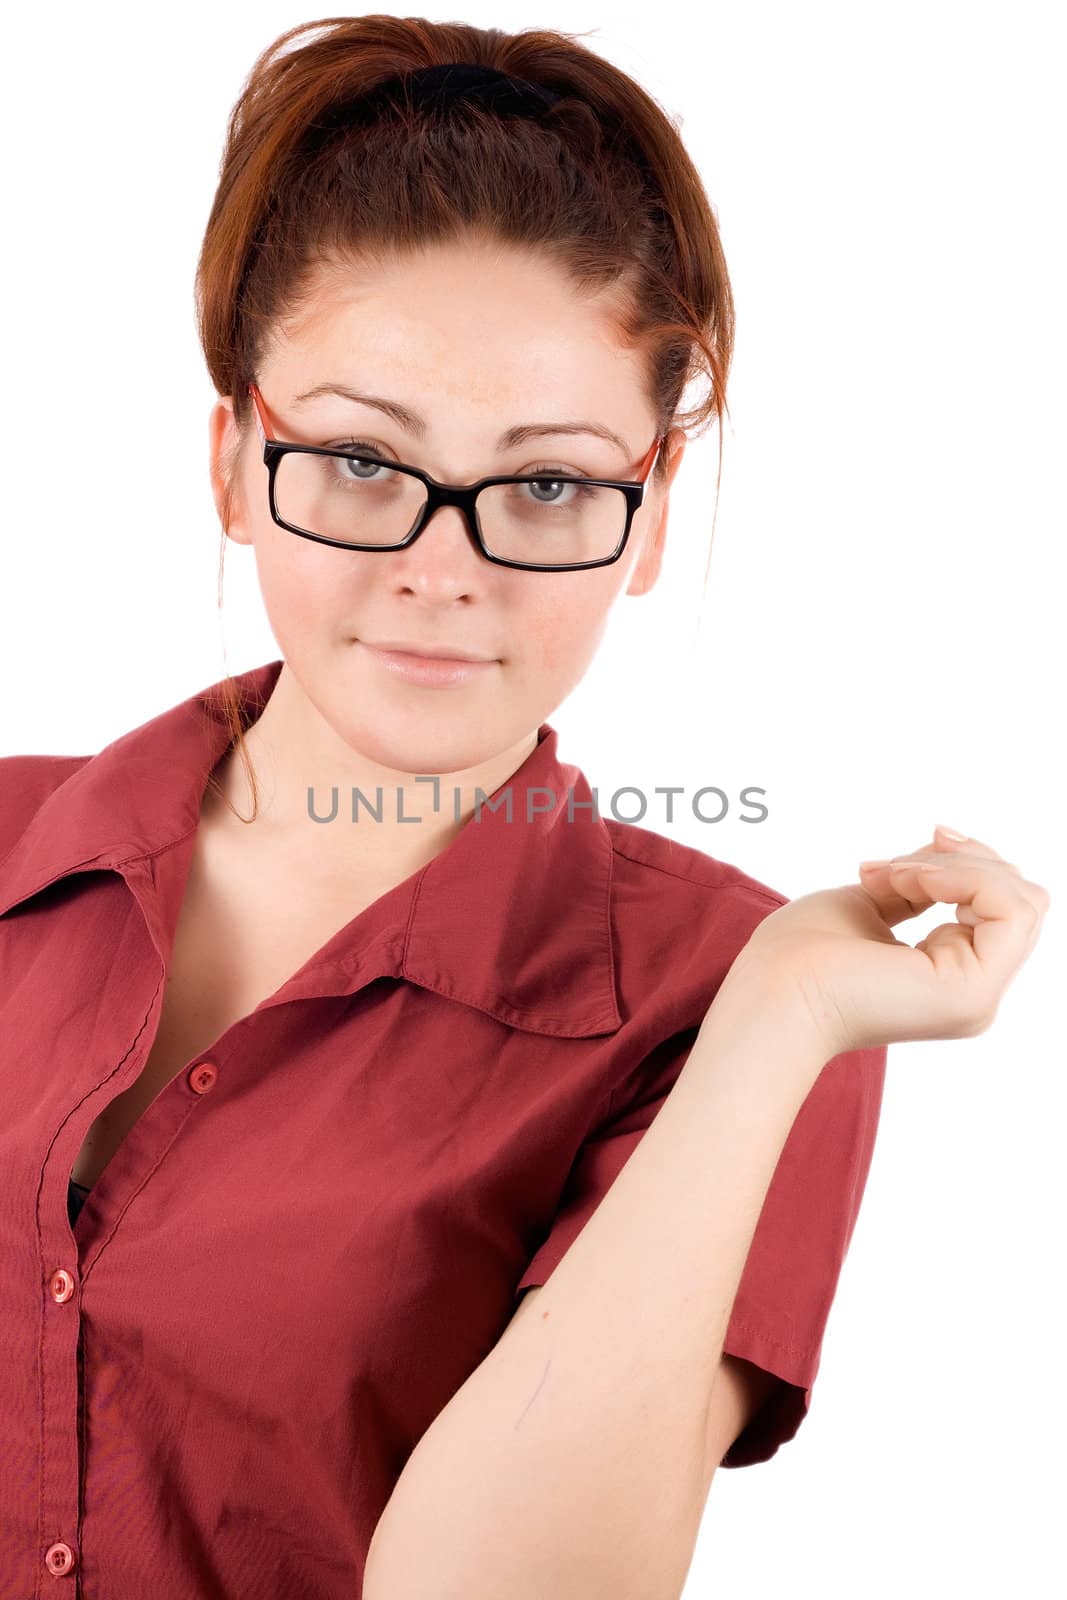 Girl in glasses isolated on white background
